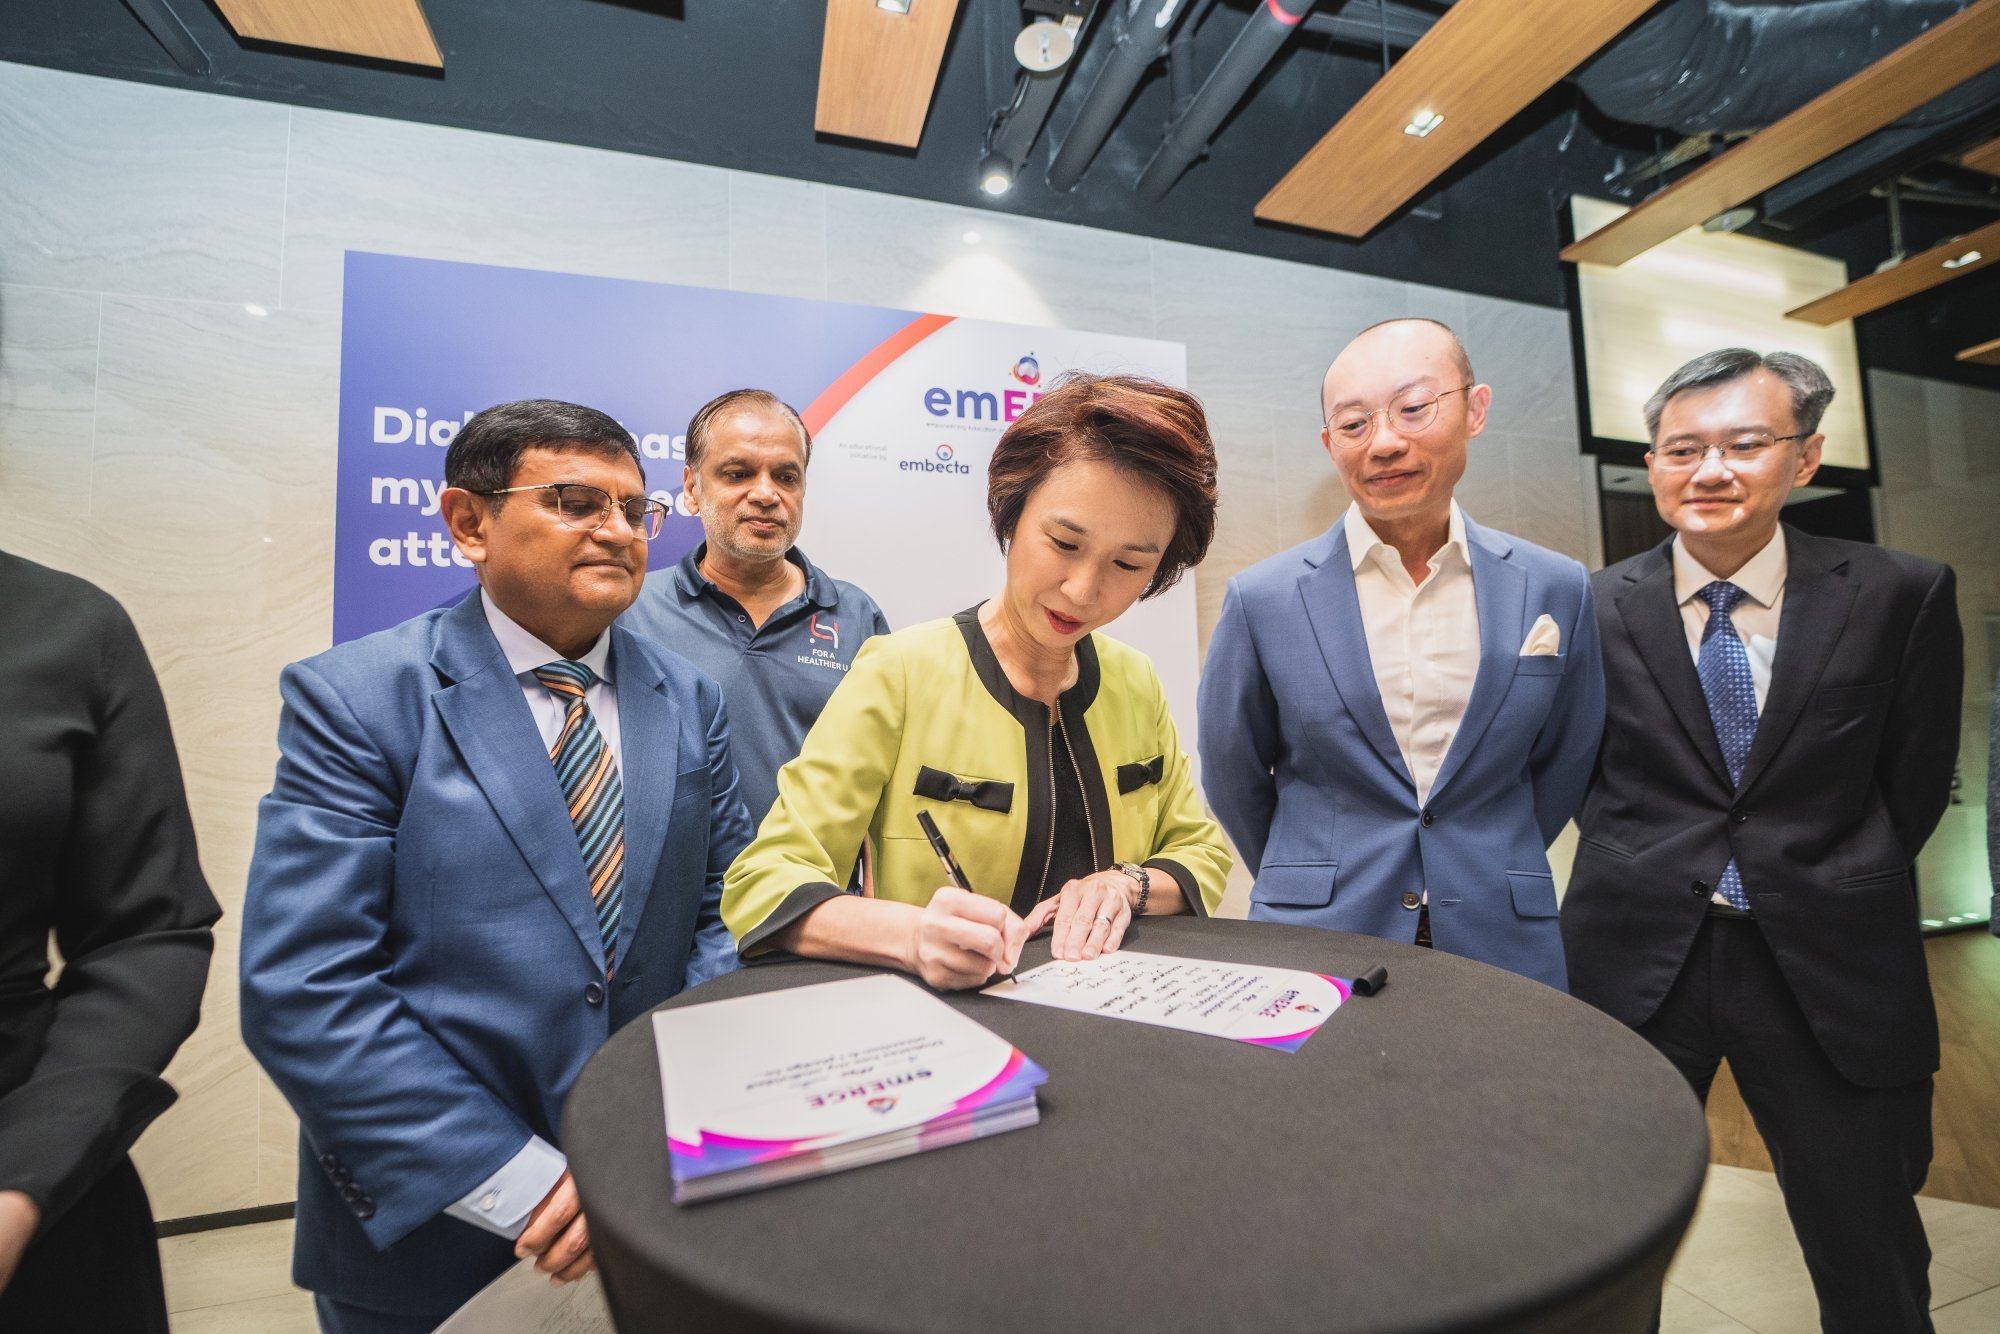 embecta, a global diabetes care company with a 100-year legacy in insulin delivery launched emERGE, a regional educational initiative in partnership with the Association of Diabetes Educators Singapore (ADES) and Diabetes Singapore last Saturday. 

5